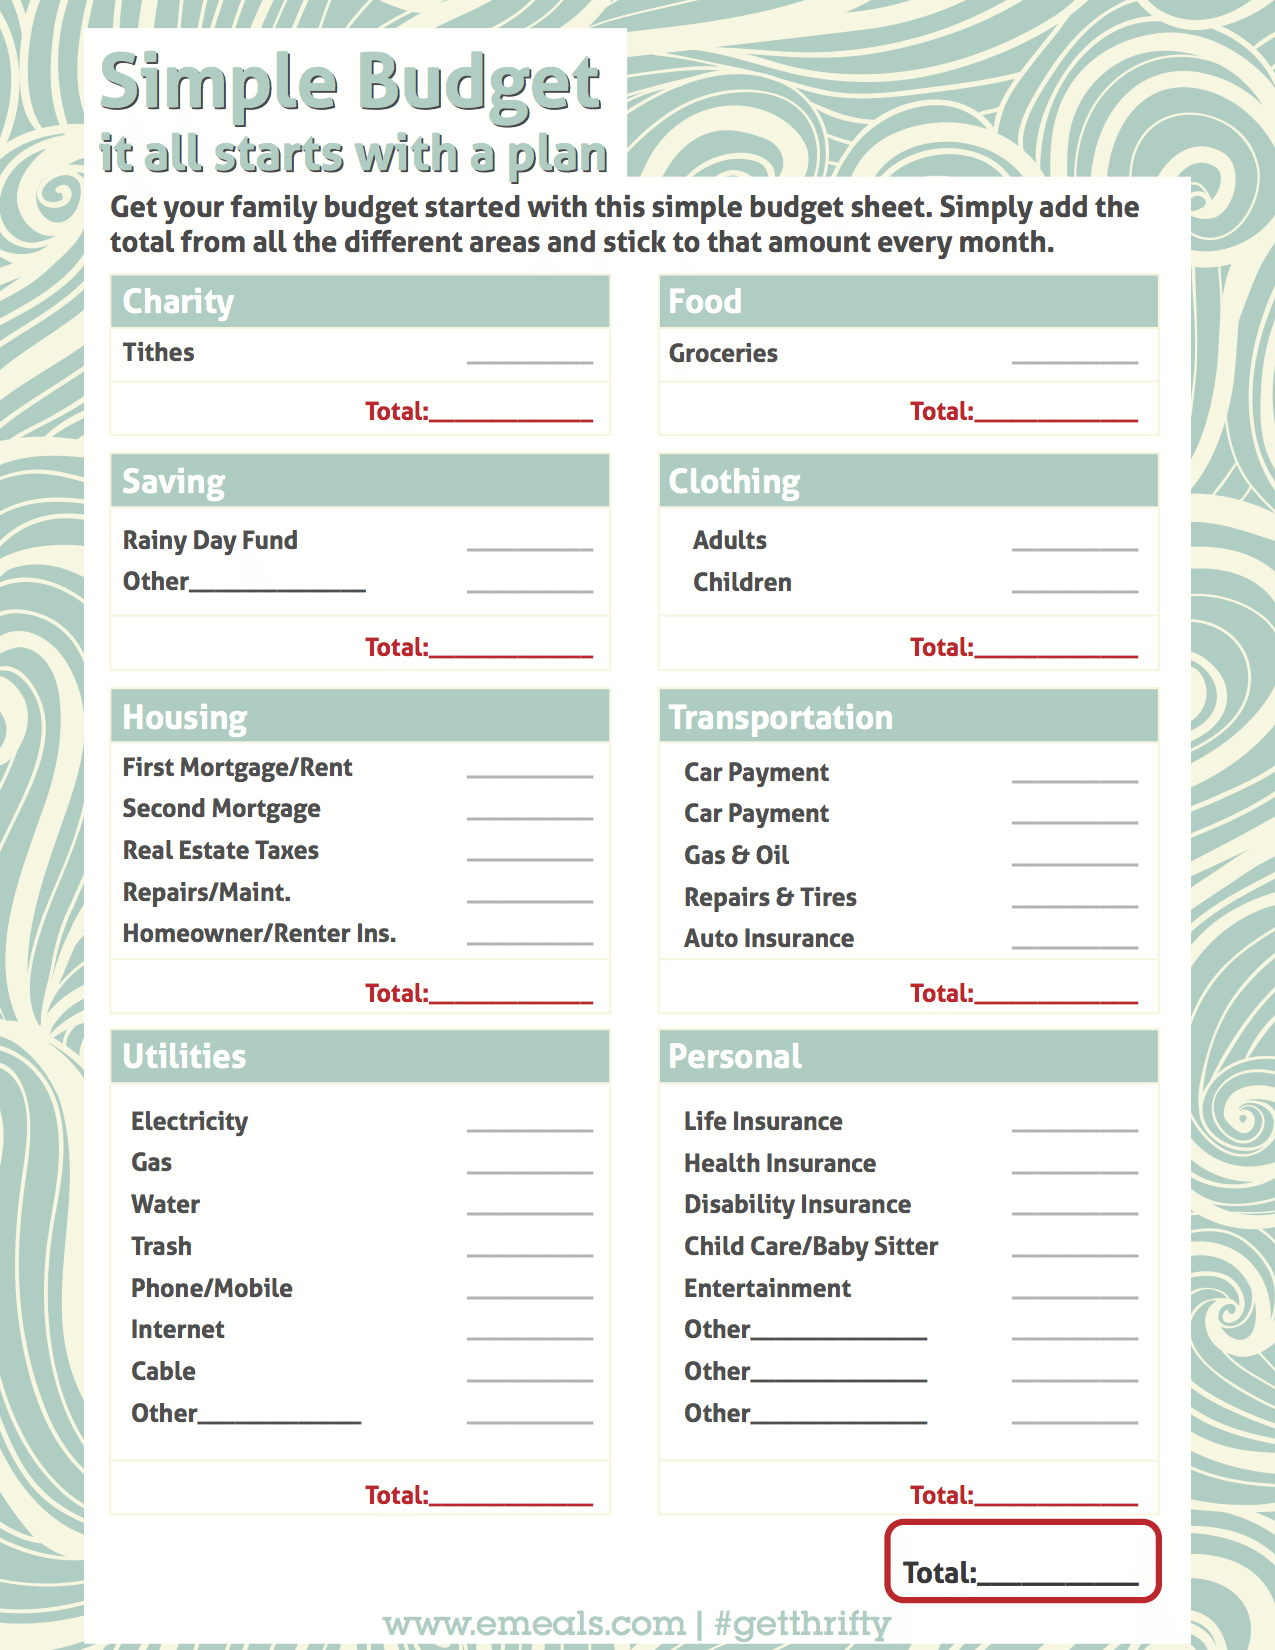 Simple Budget Worksheet Free Printable | For The Home | Pinterest - Free Printable Family Budget